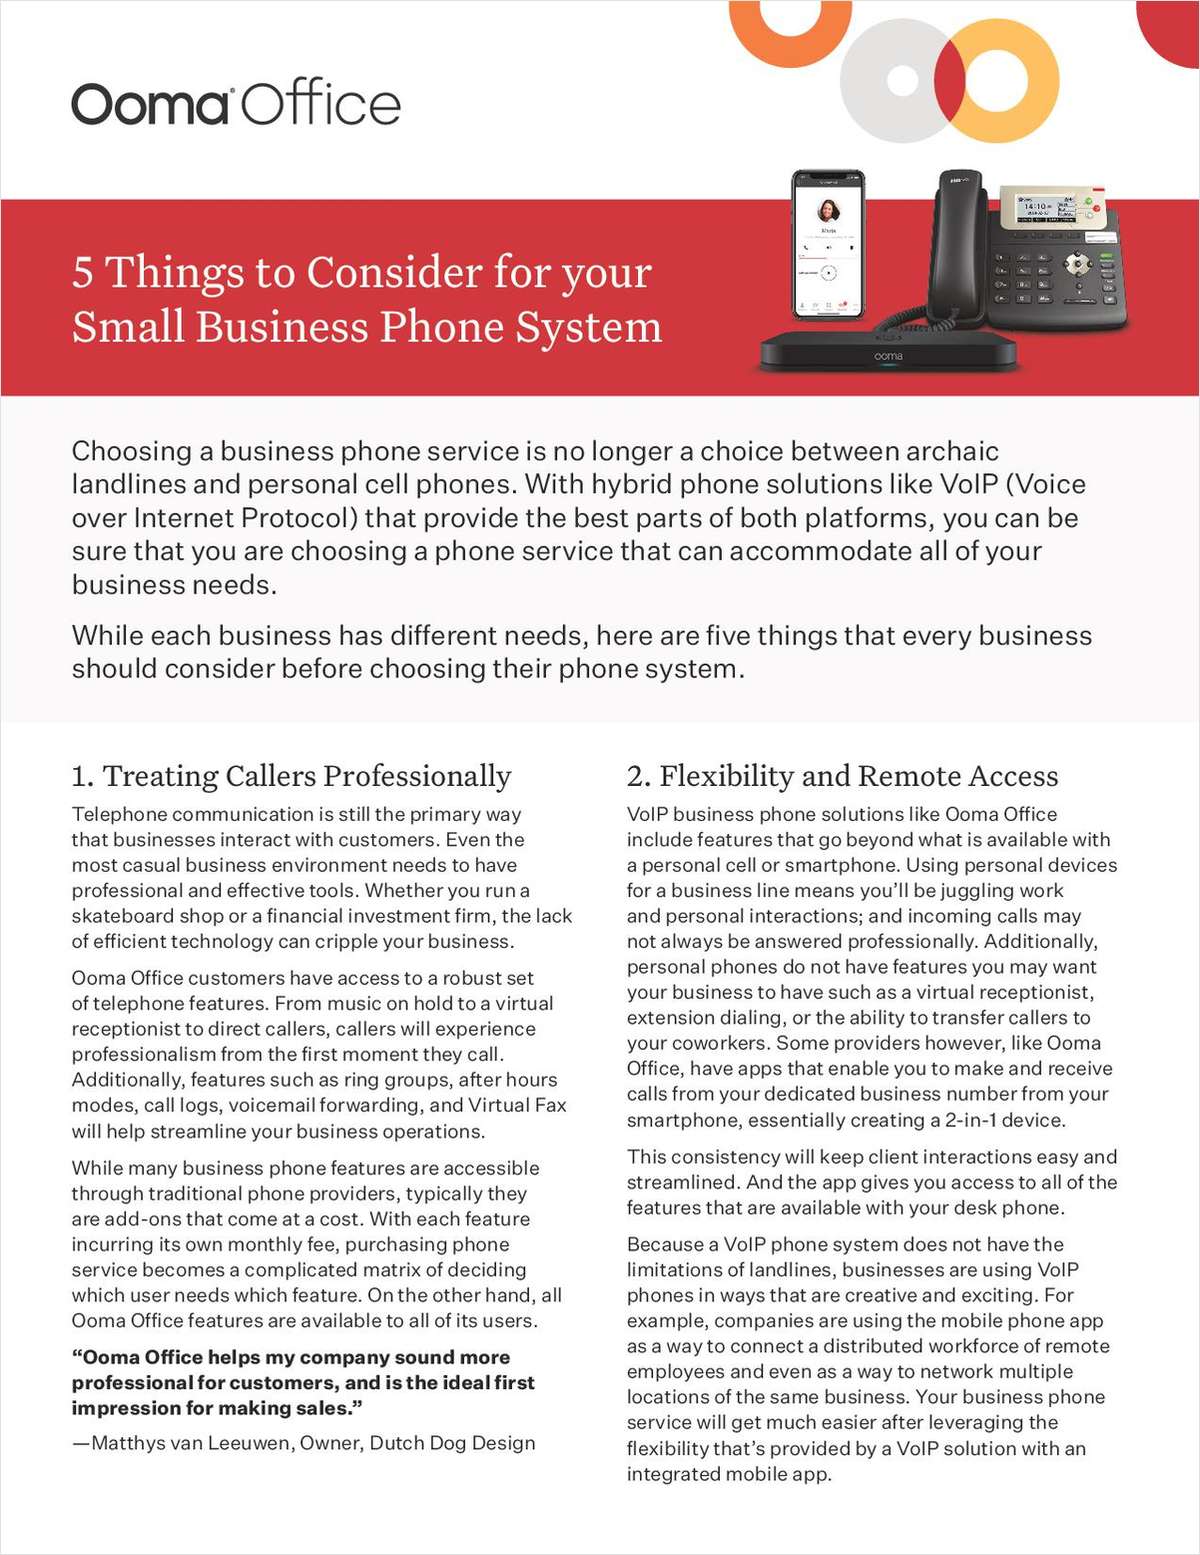 5 Things to Consider for your Small Business Phone System